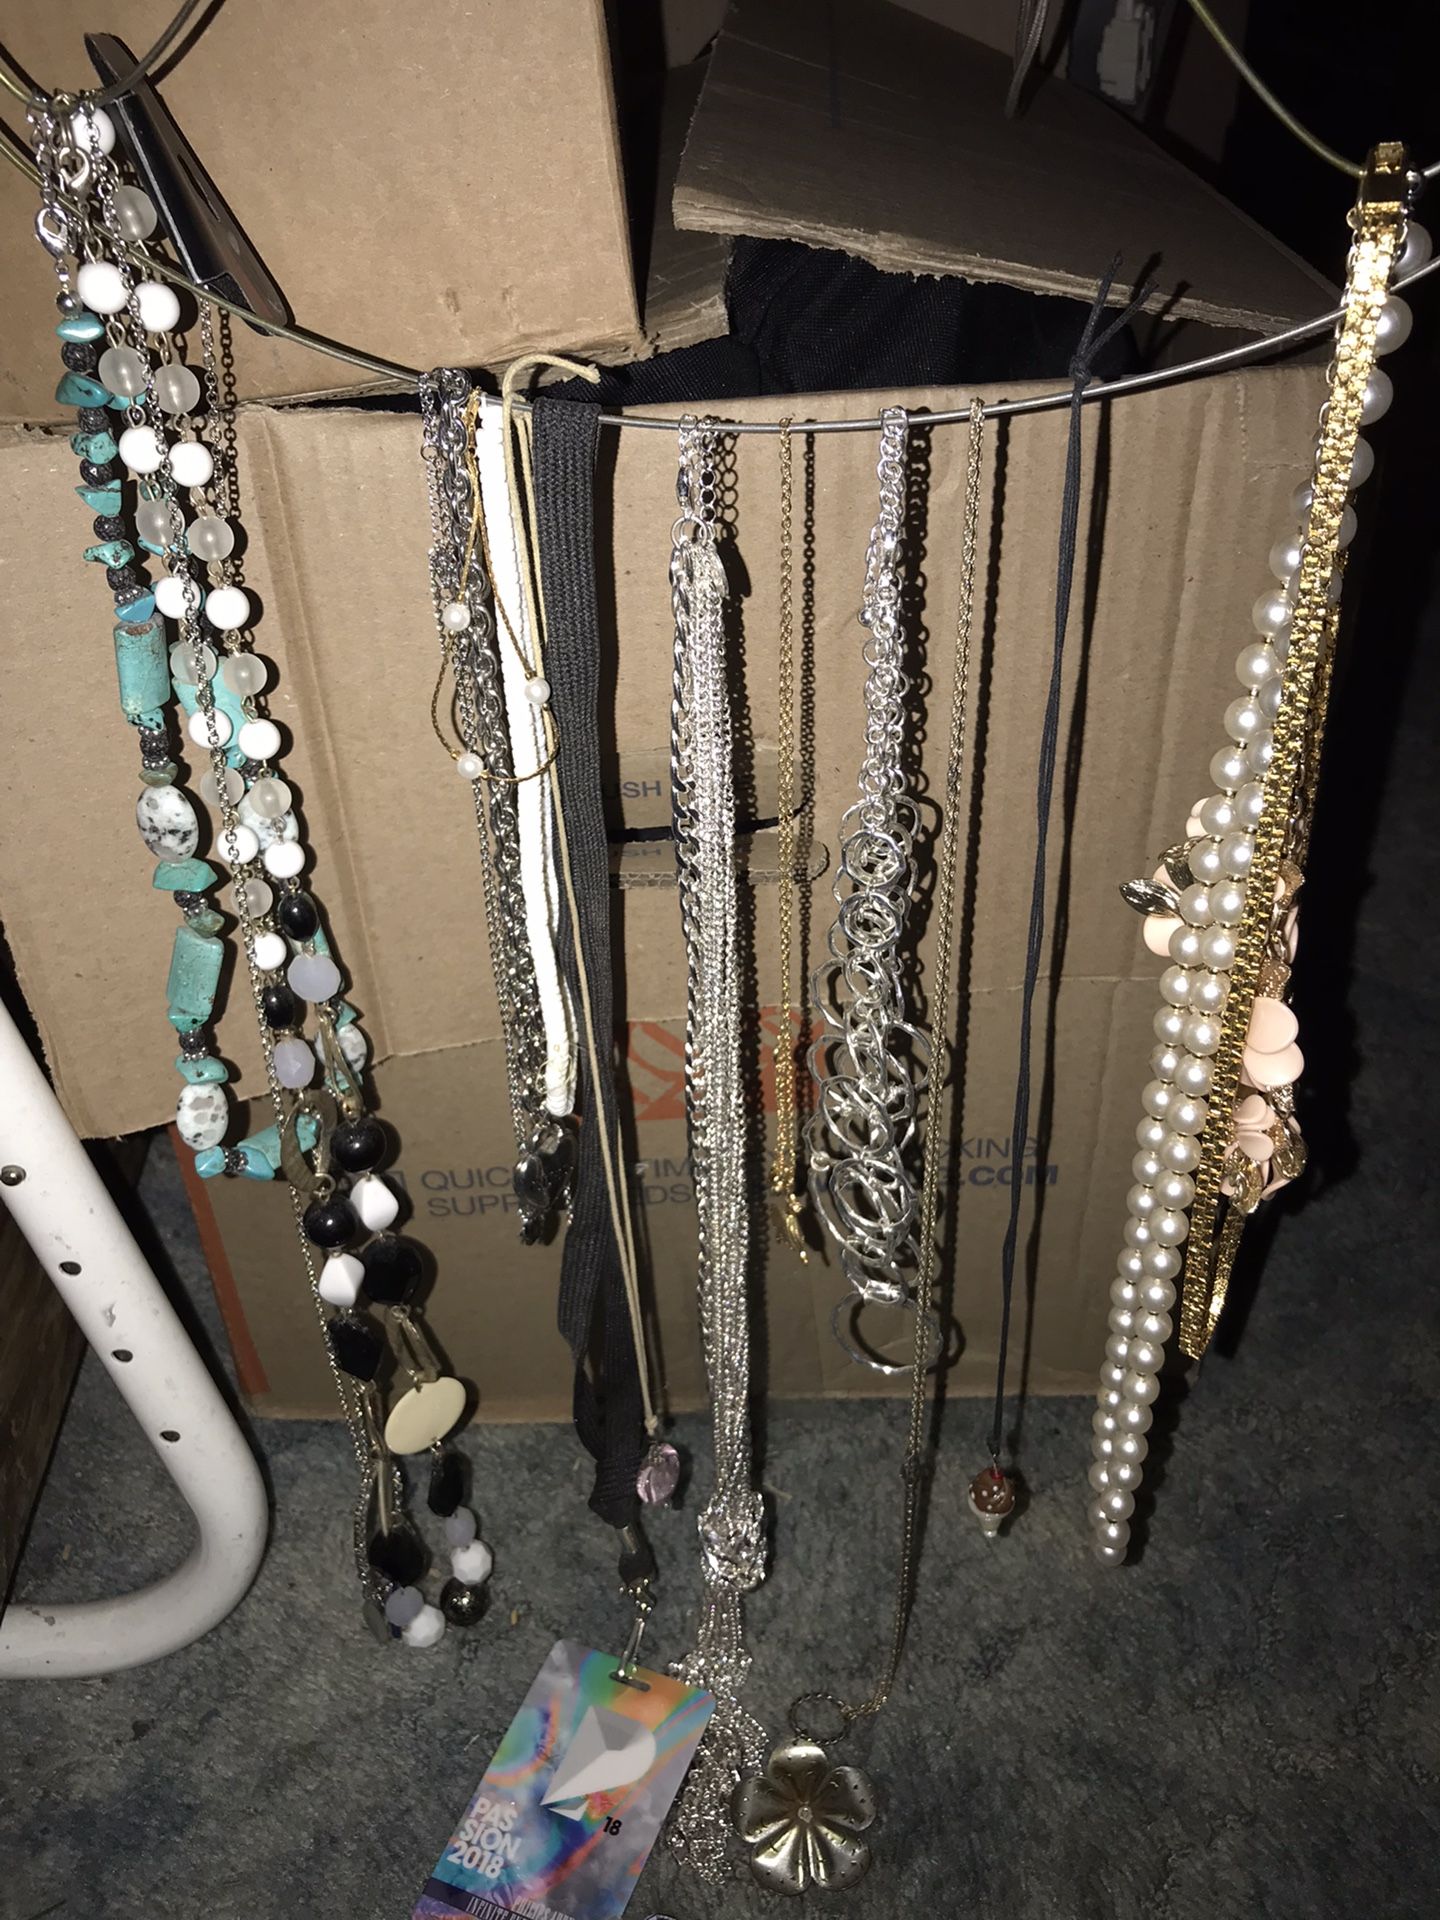 Nice Necklaces Turquoise Silver Shell Etc. Only $10 Each